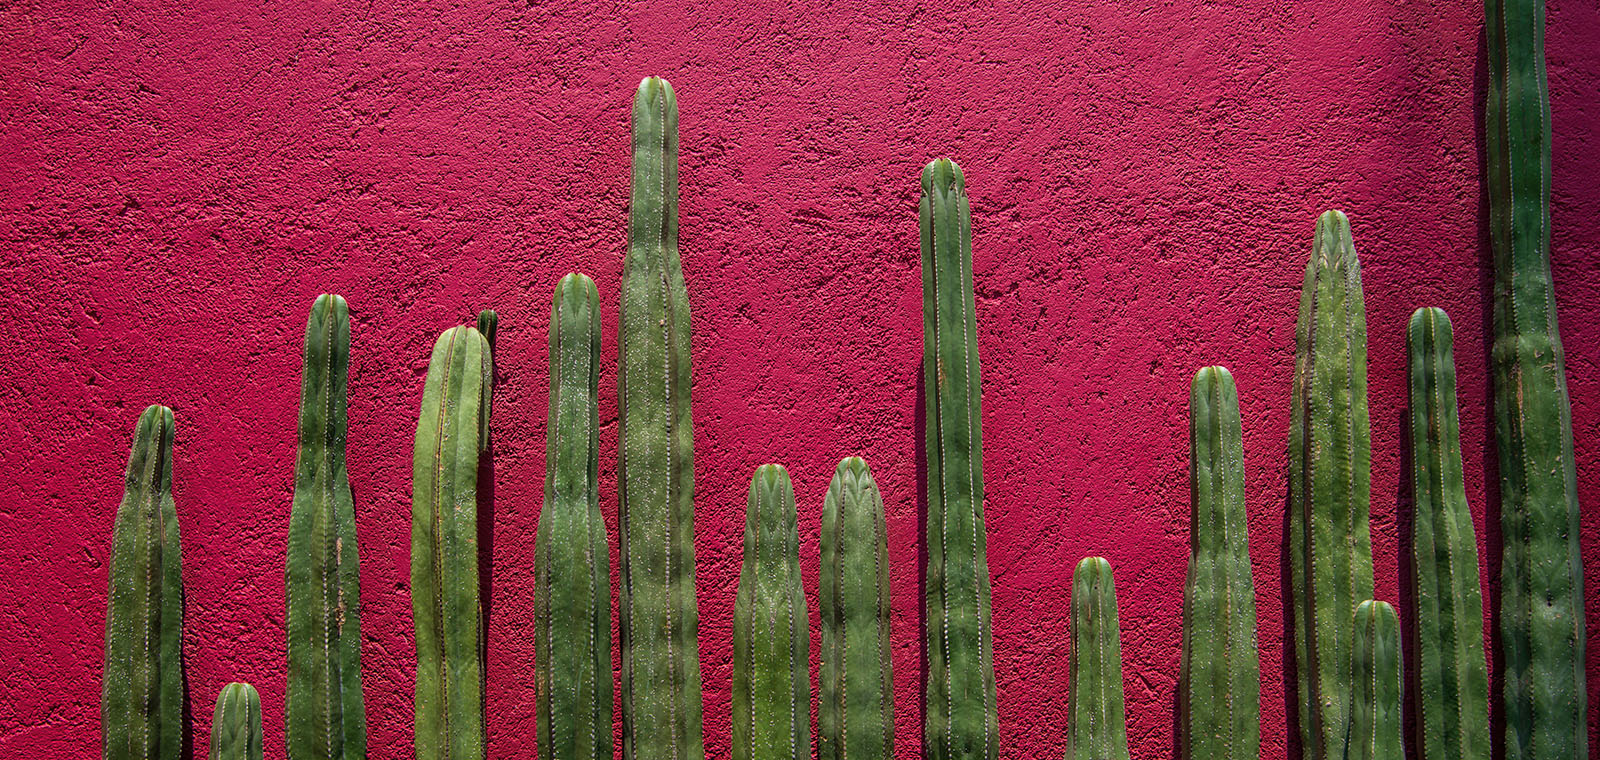 A row of prickly, skinny, columnar cacti, known as Mexican fenceposts, line up in varying heights against a hot-pink stucco wall.